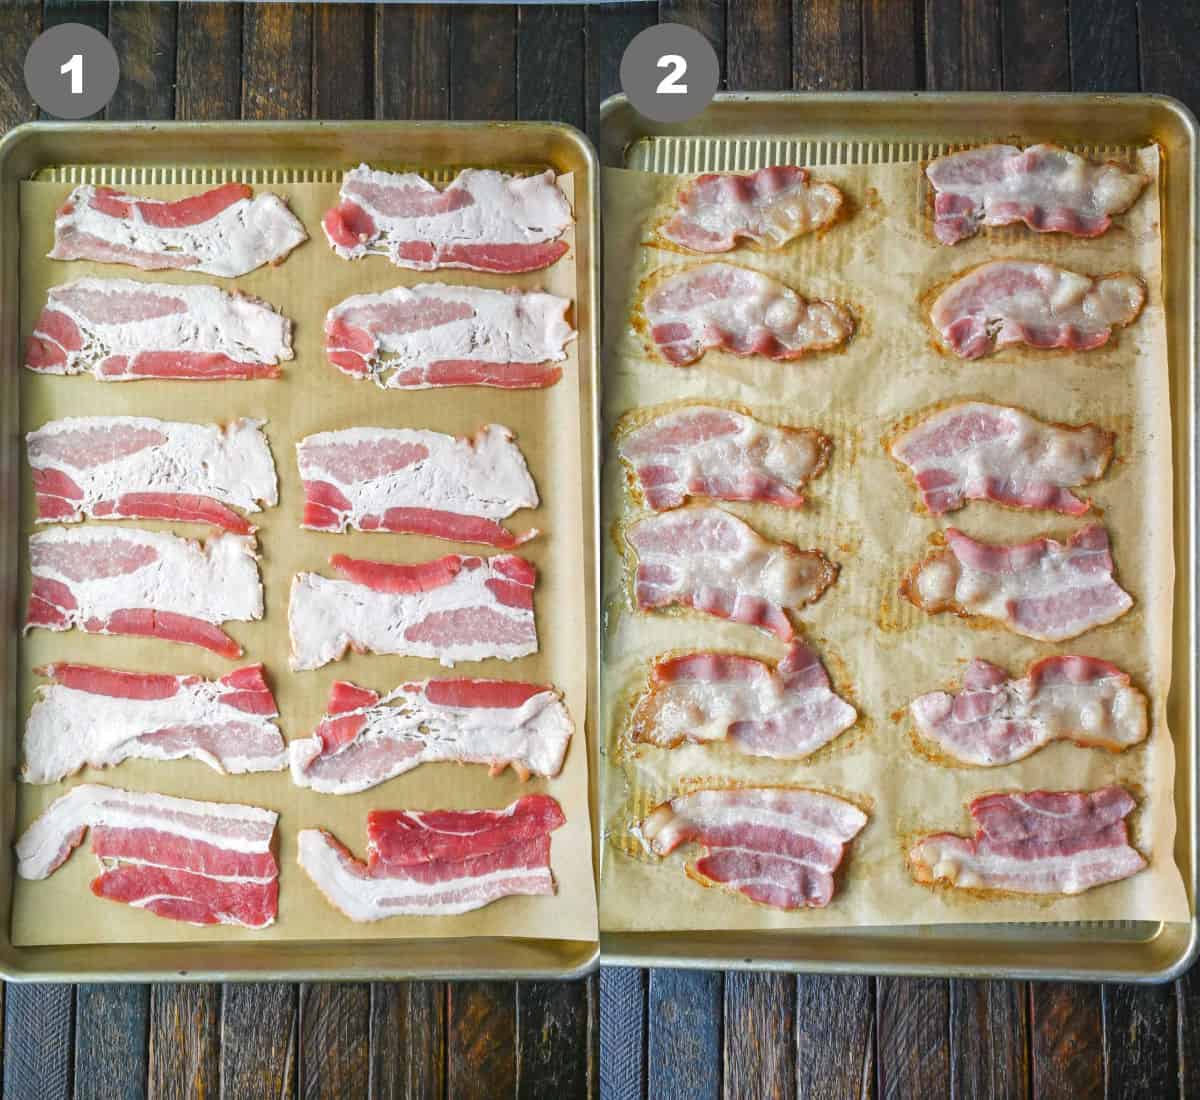 bacon slices placed on a baking sheet and partly cooked.